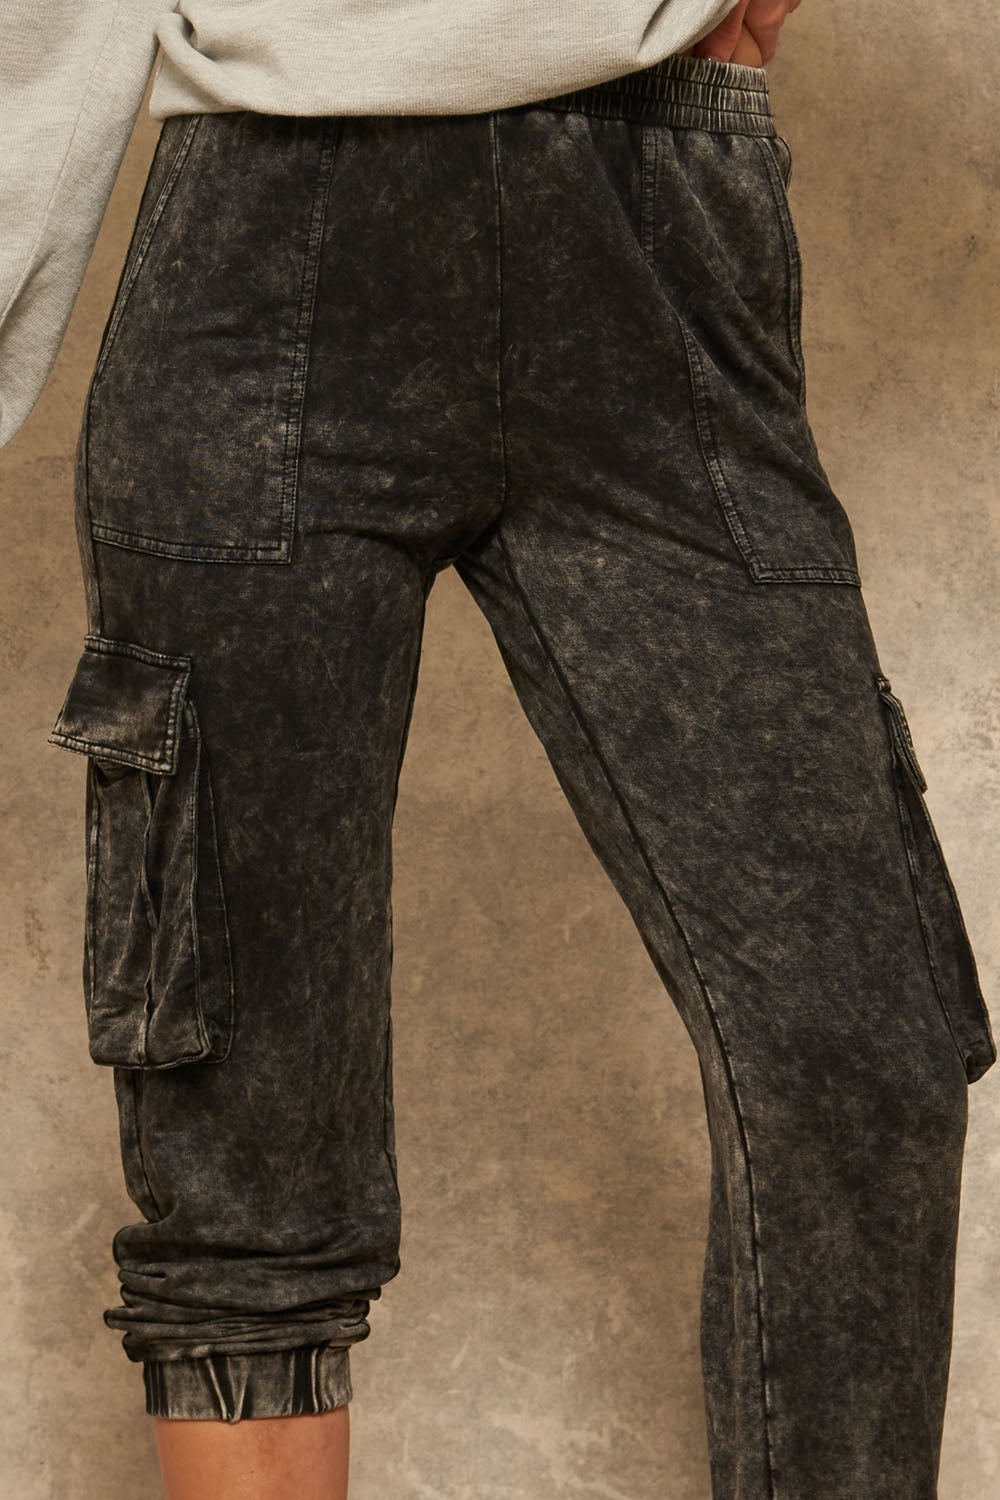 Mineral Washed Knit Cargo Jogger Pants